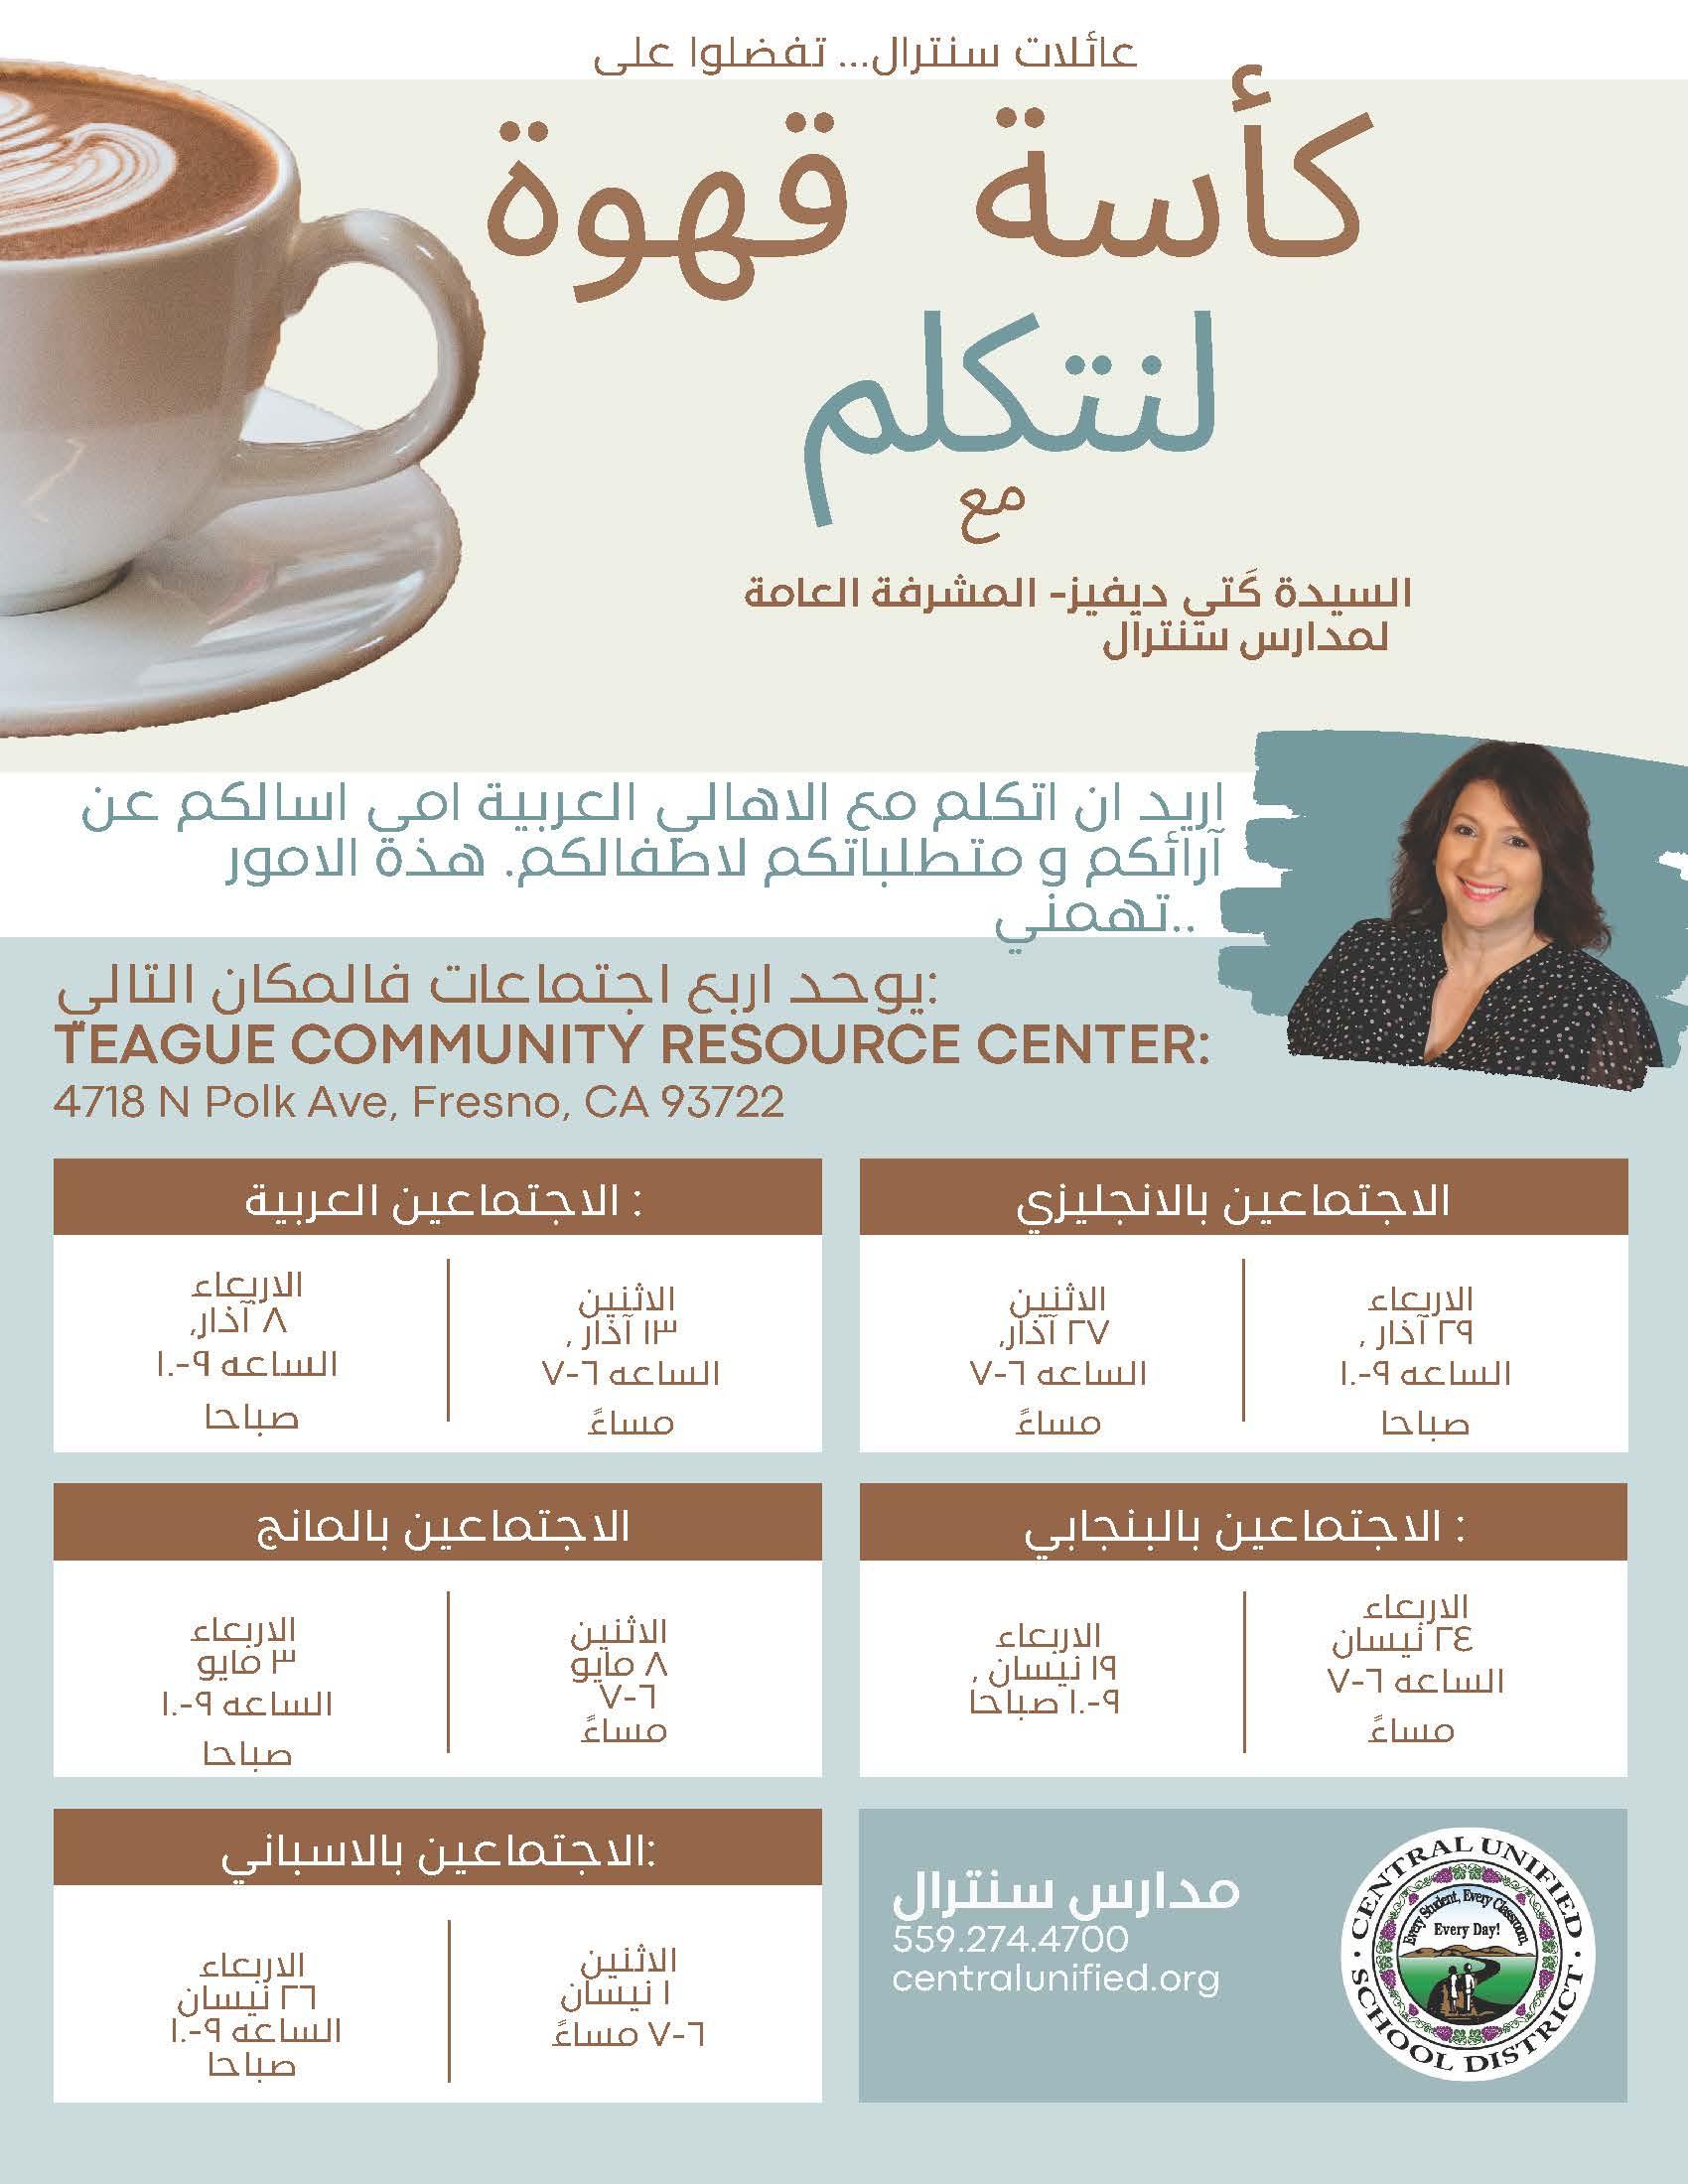 coffee chat flyer in Arabic